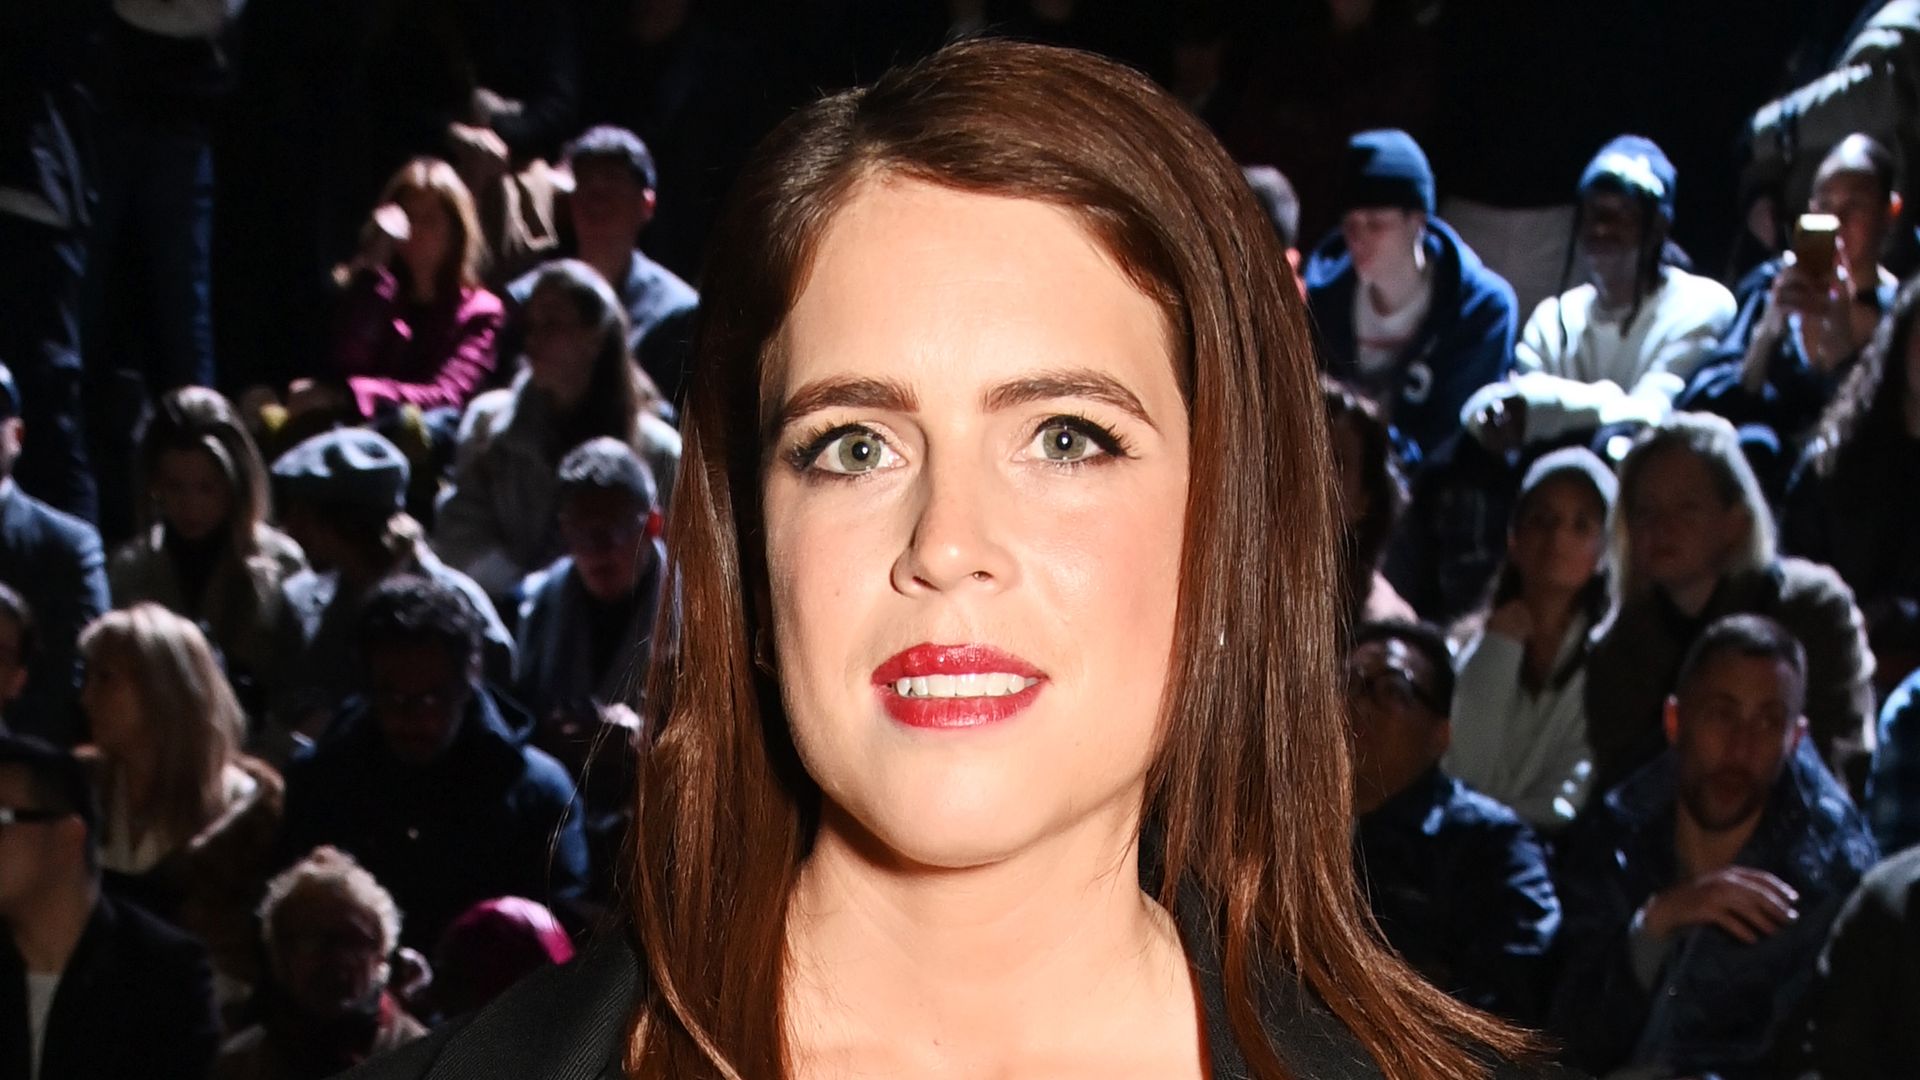 Princess Eugenie just wore the A-list shoe of this season and it's so chic